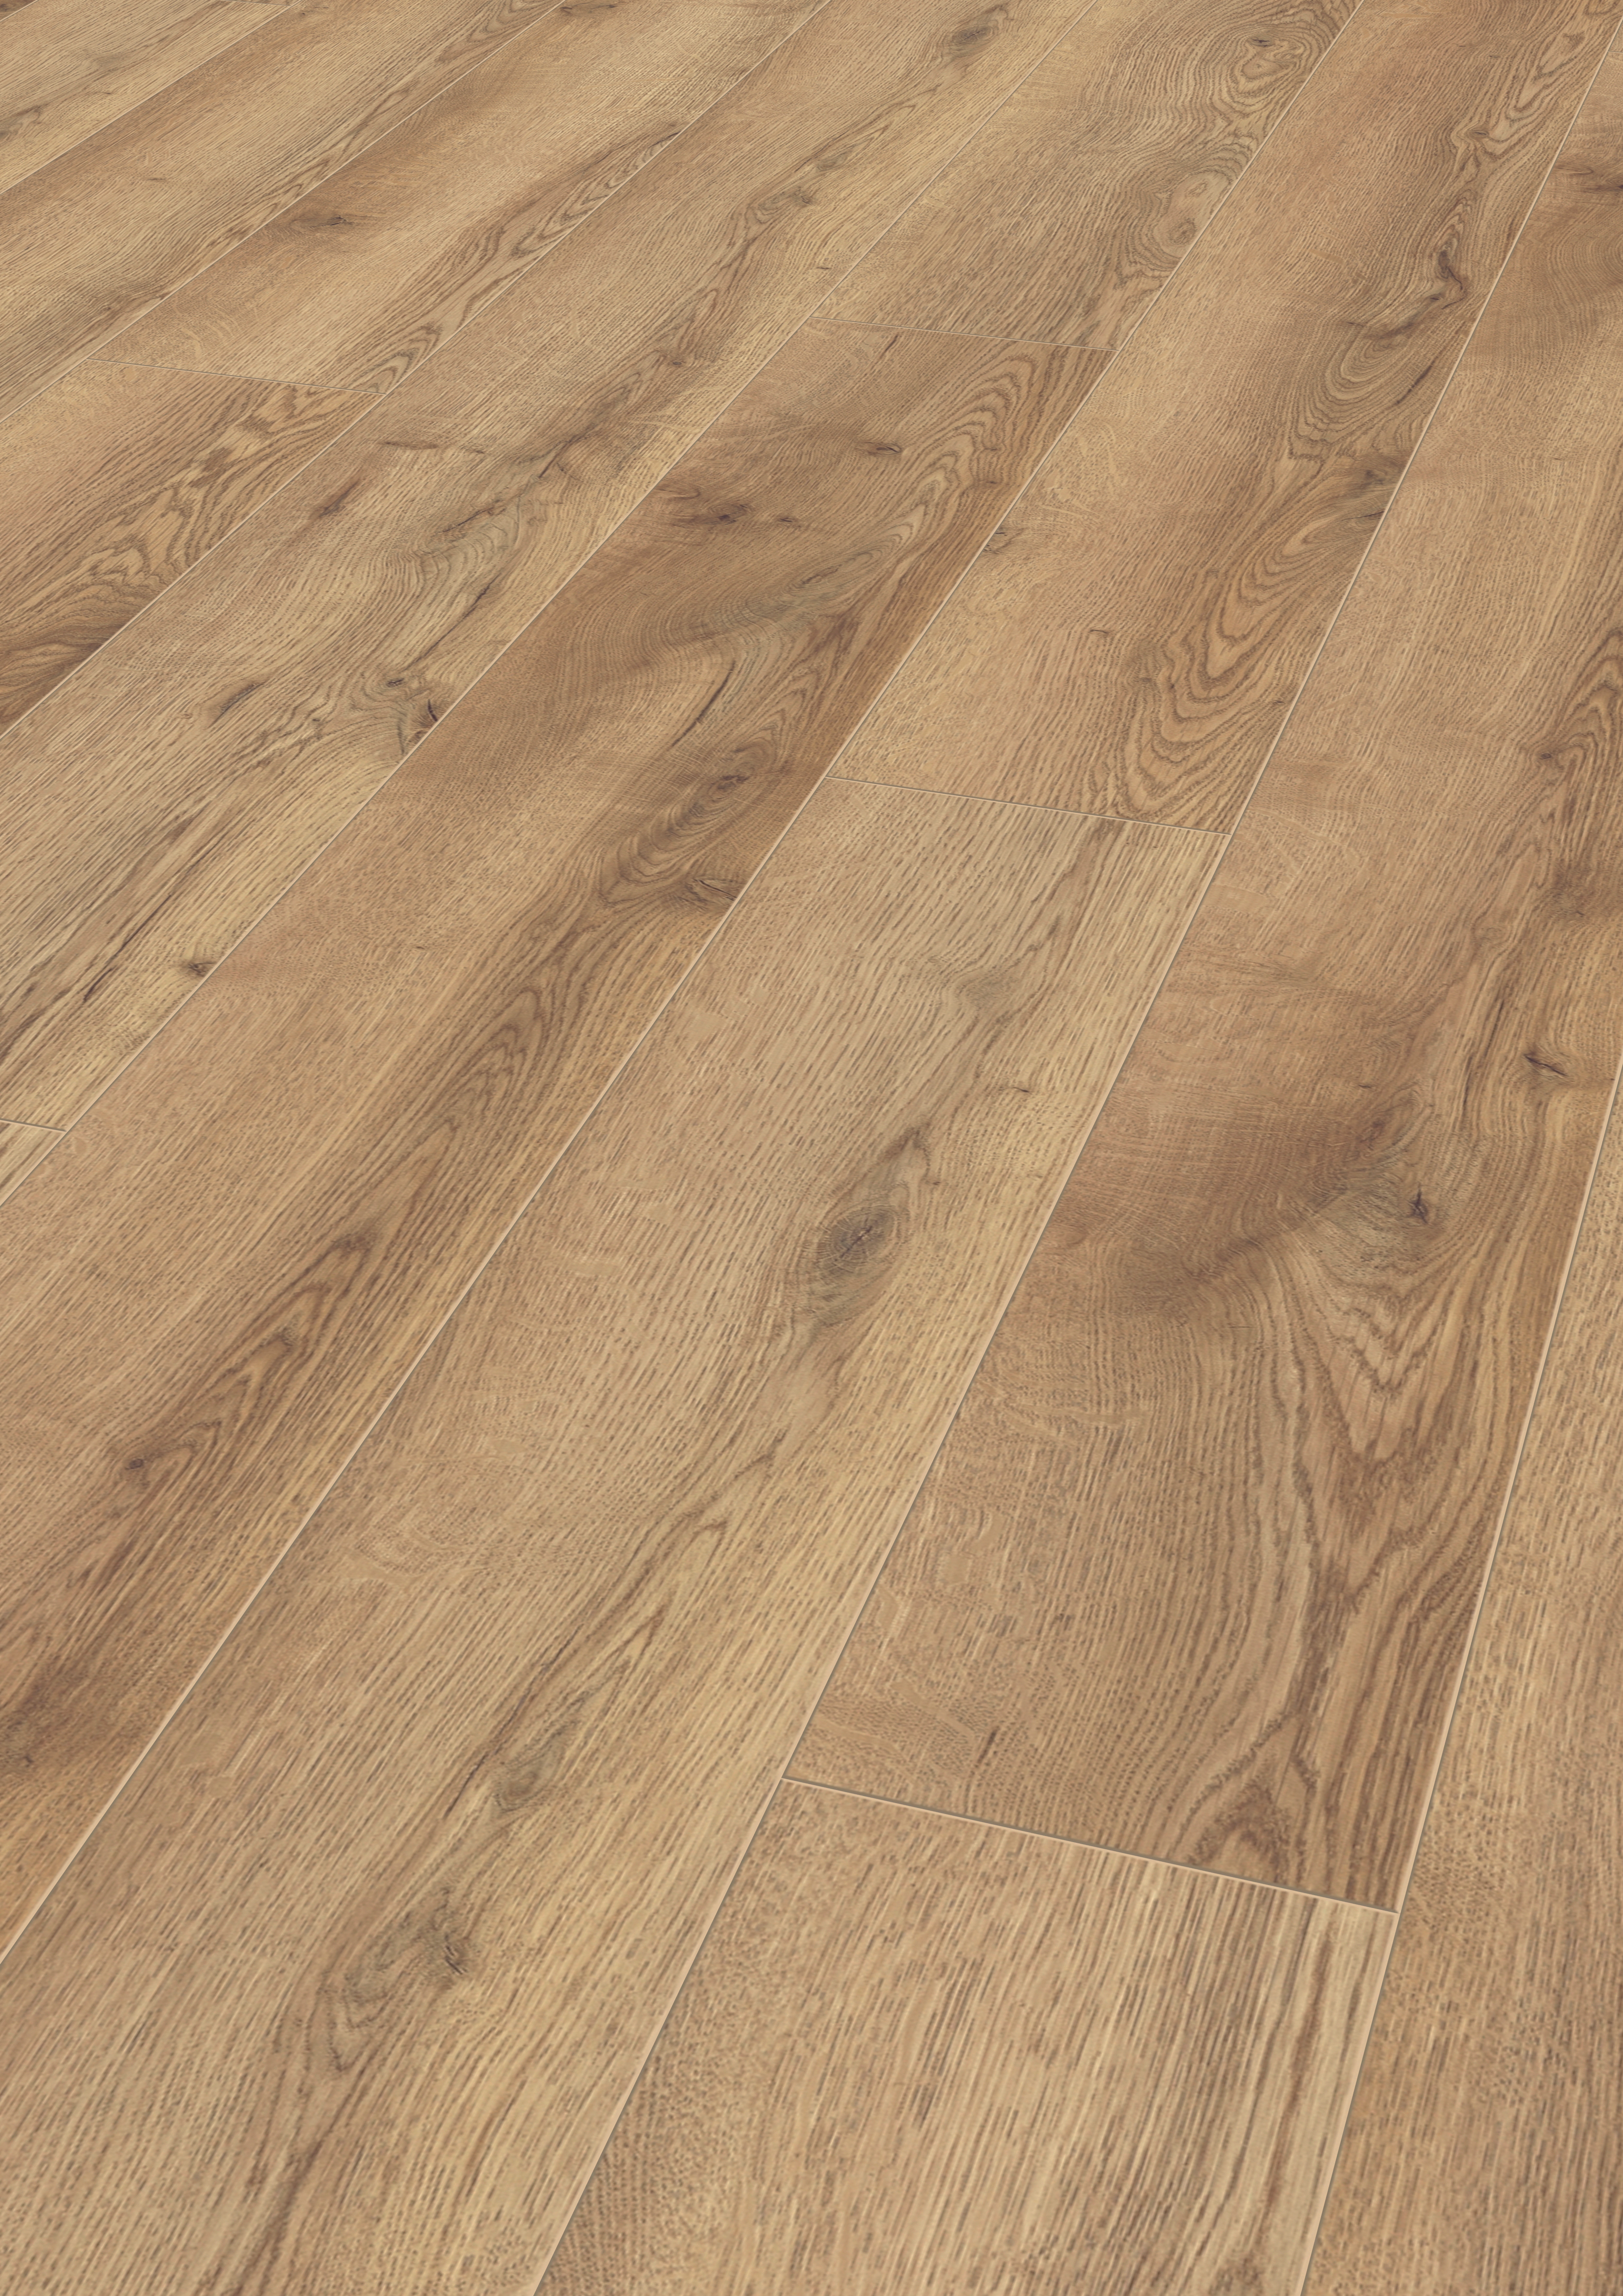 11 Lovable Hardwood Flooring Mississauga Ontario 2024 free download hardwood flooring mississauga ontario of mammut laminate flooring in country house plank style kronotex for download picture amp